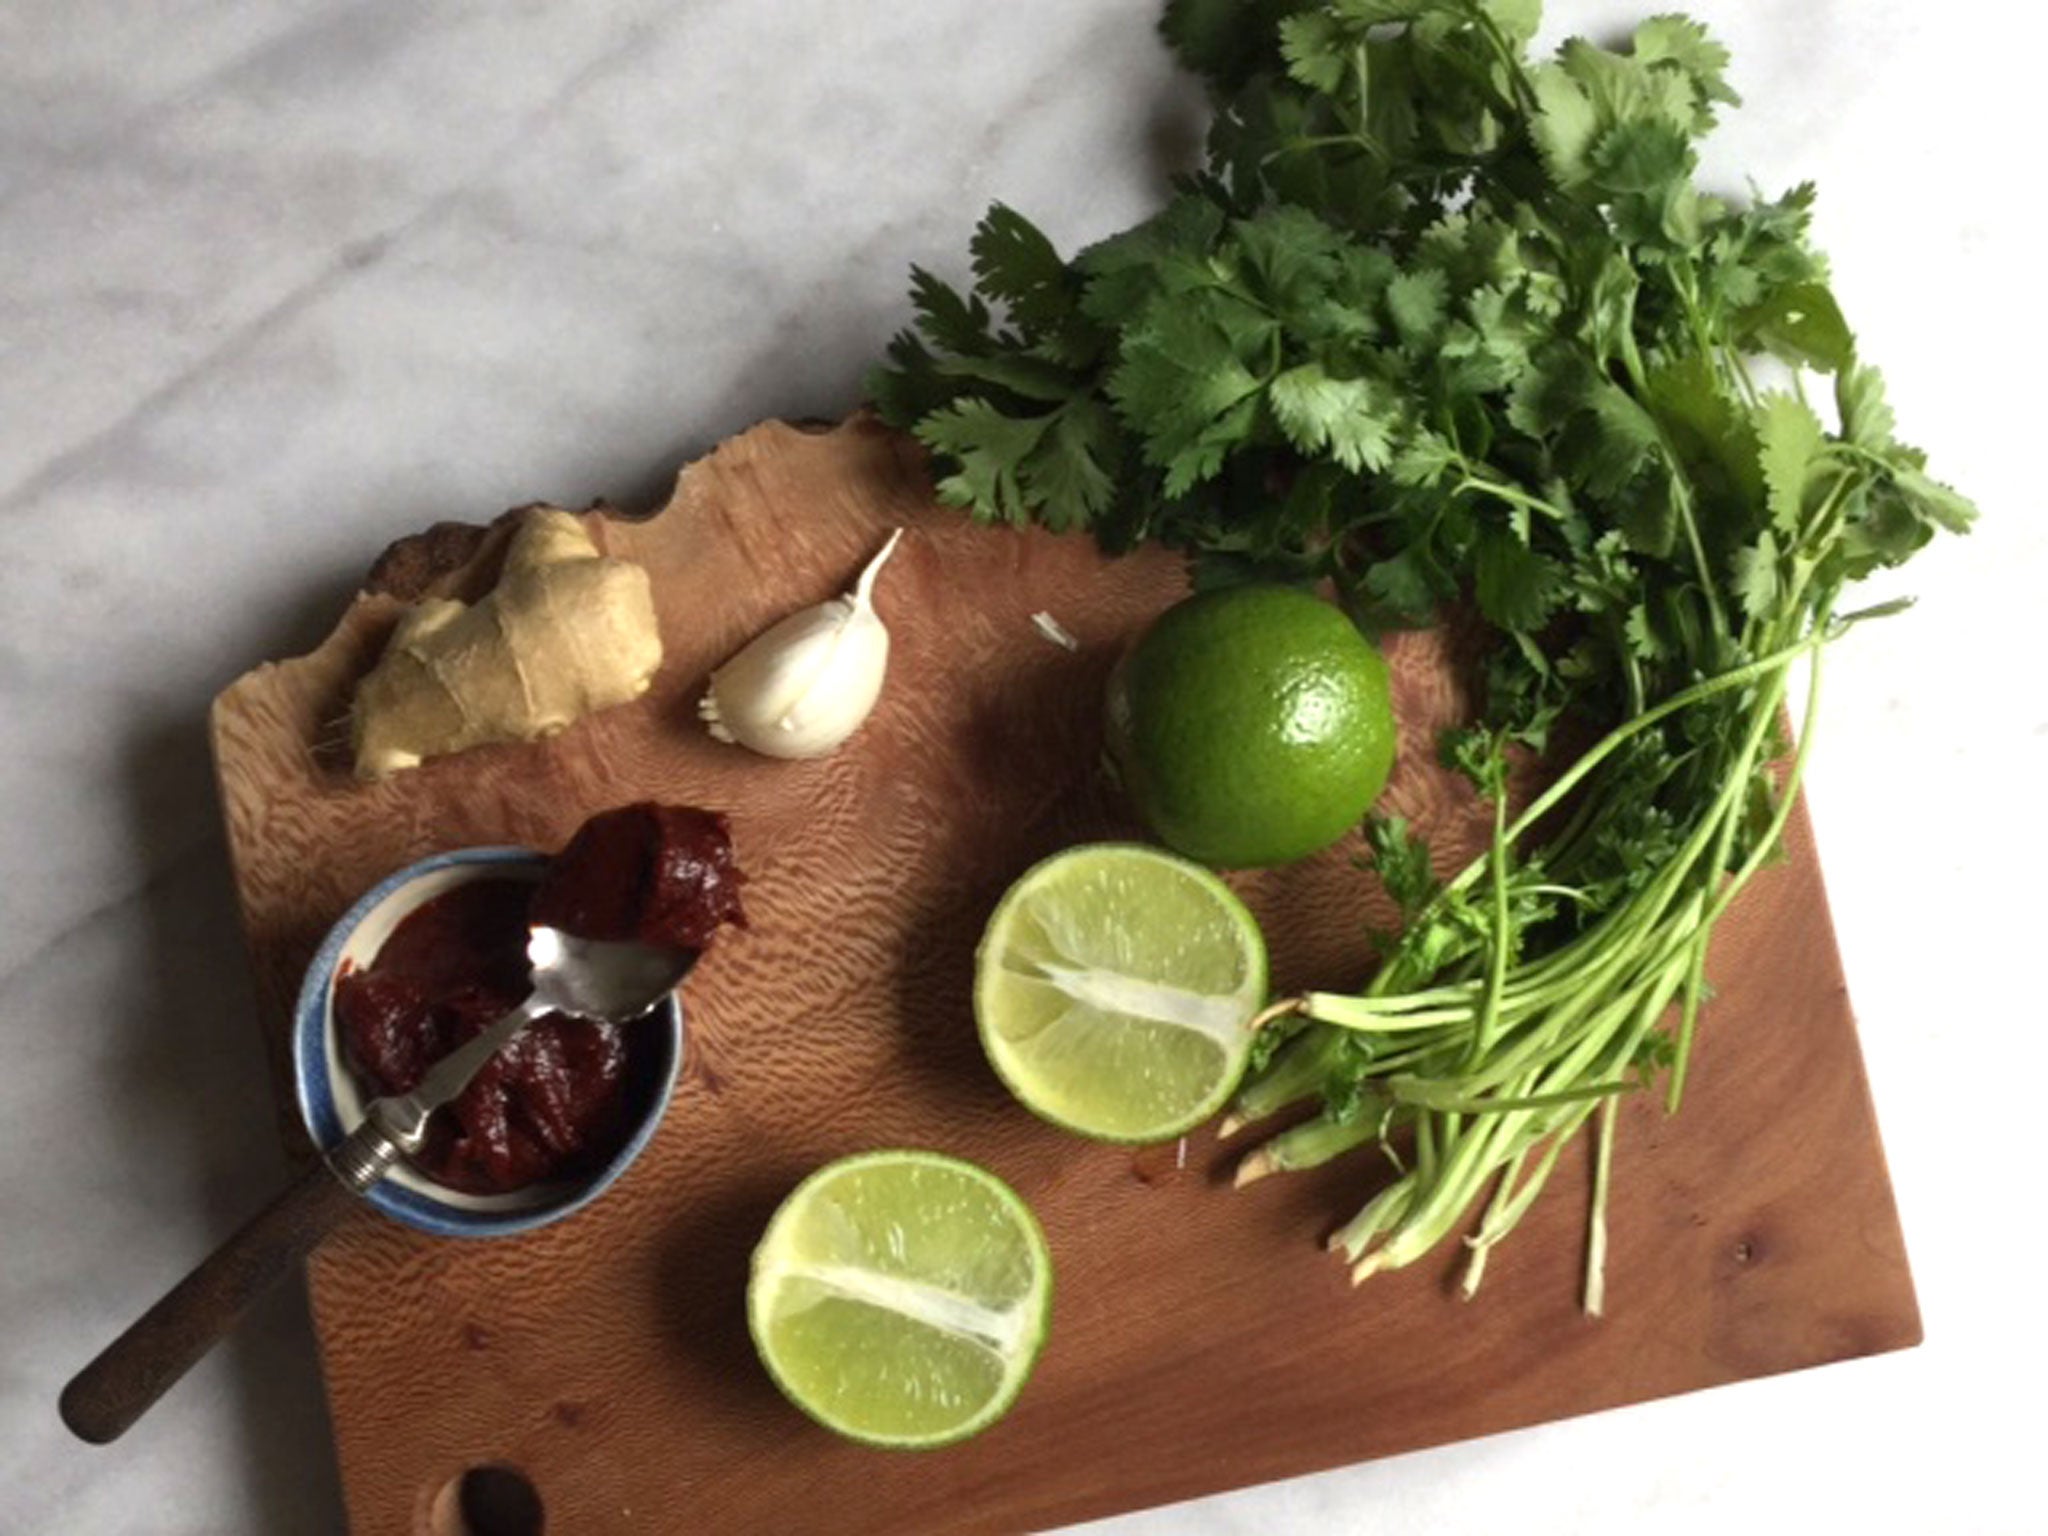 Julia adds ginger, garlic, lime, coriander, and the all-important gochujang to her dish